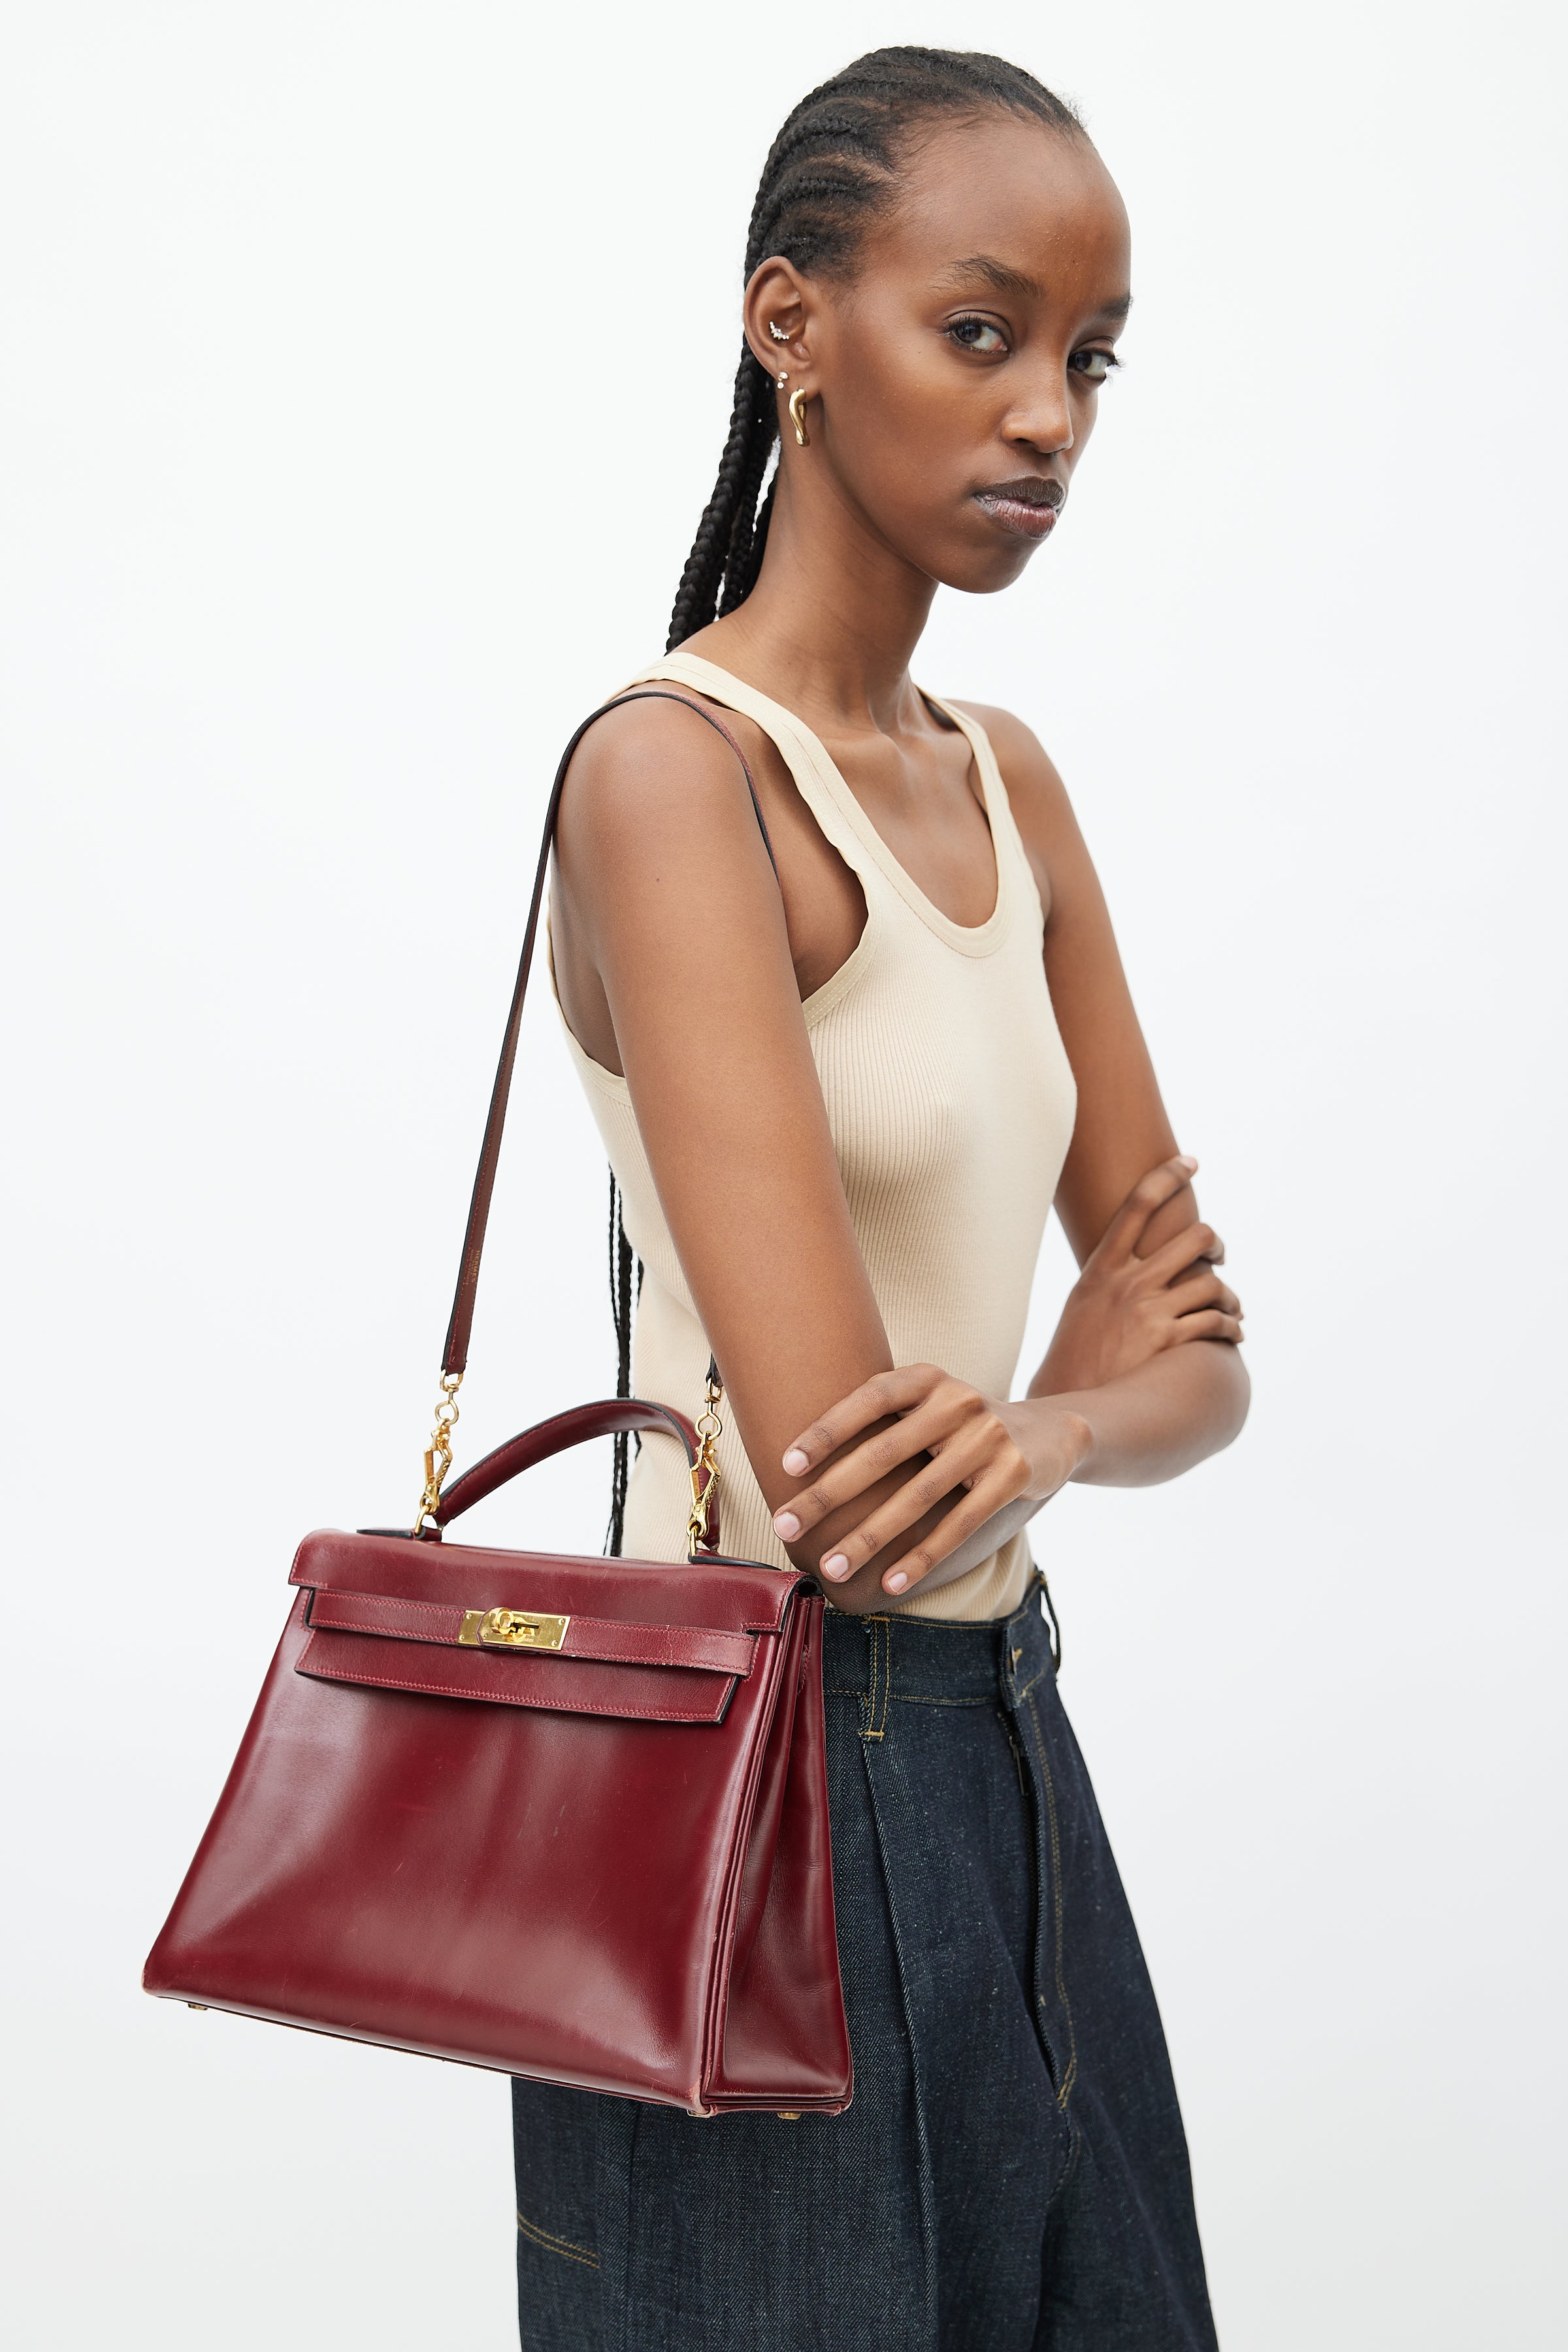 Hermes Kelly Sellier 28 Rouge H Gold